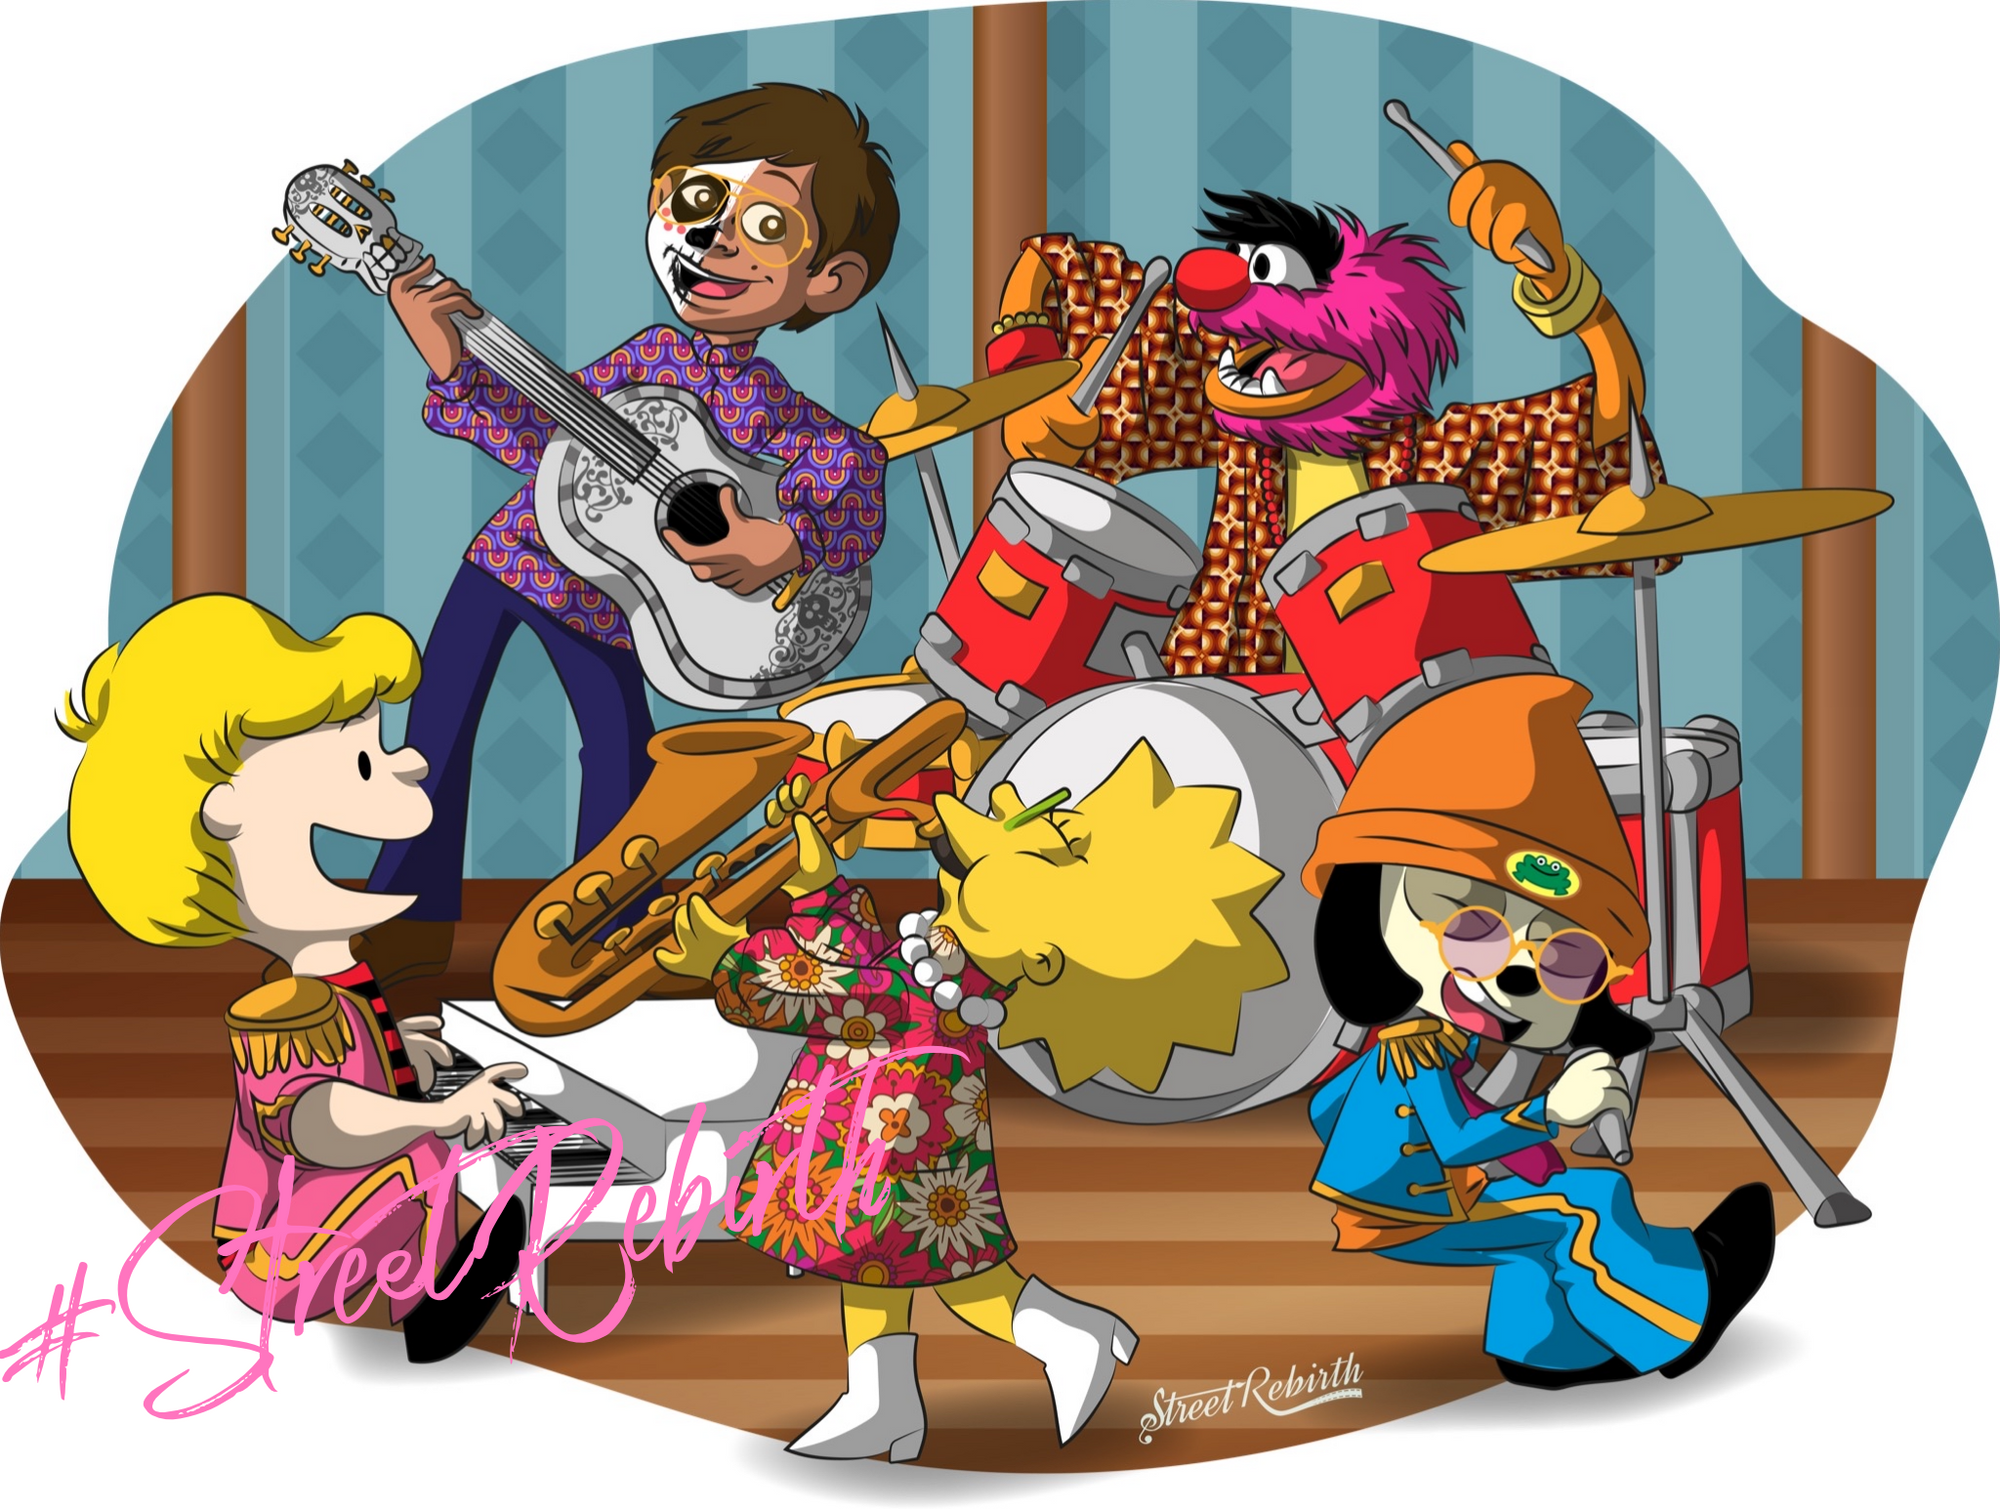 Cartoon Characters As Beatles Shirt - Direct To Garment Quality Print - Unisex Shirt - Gift For Him or Her